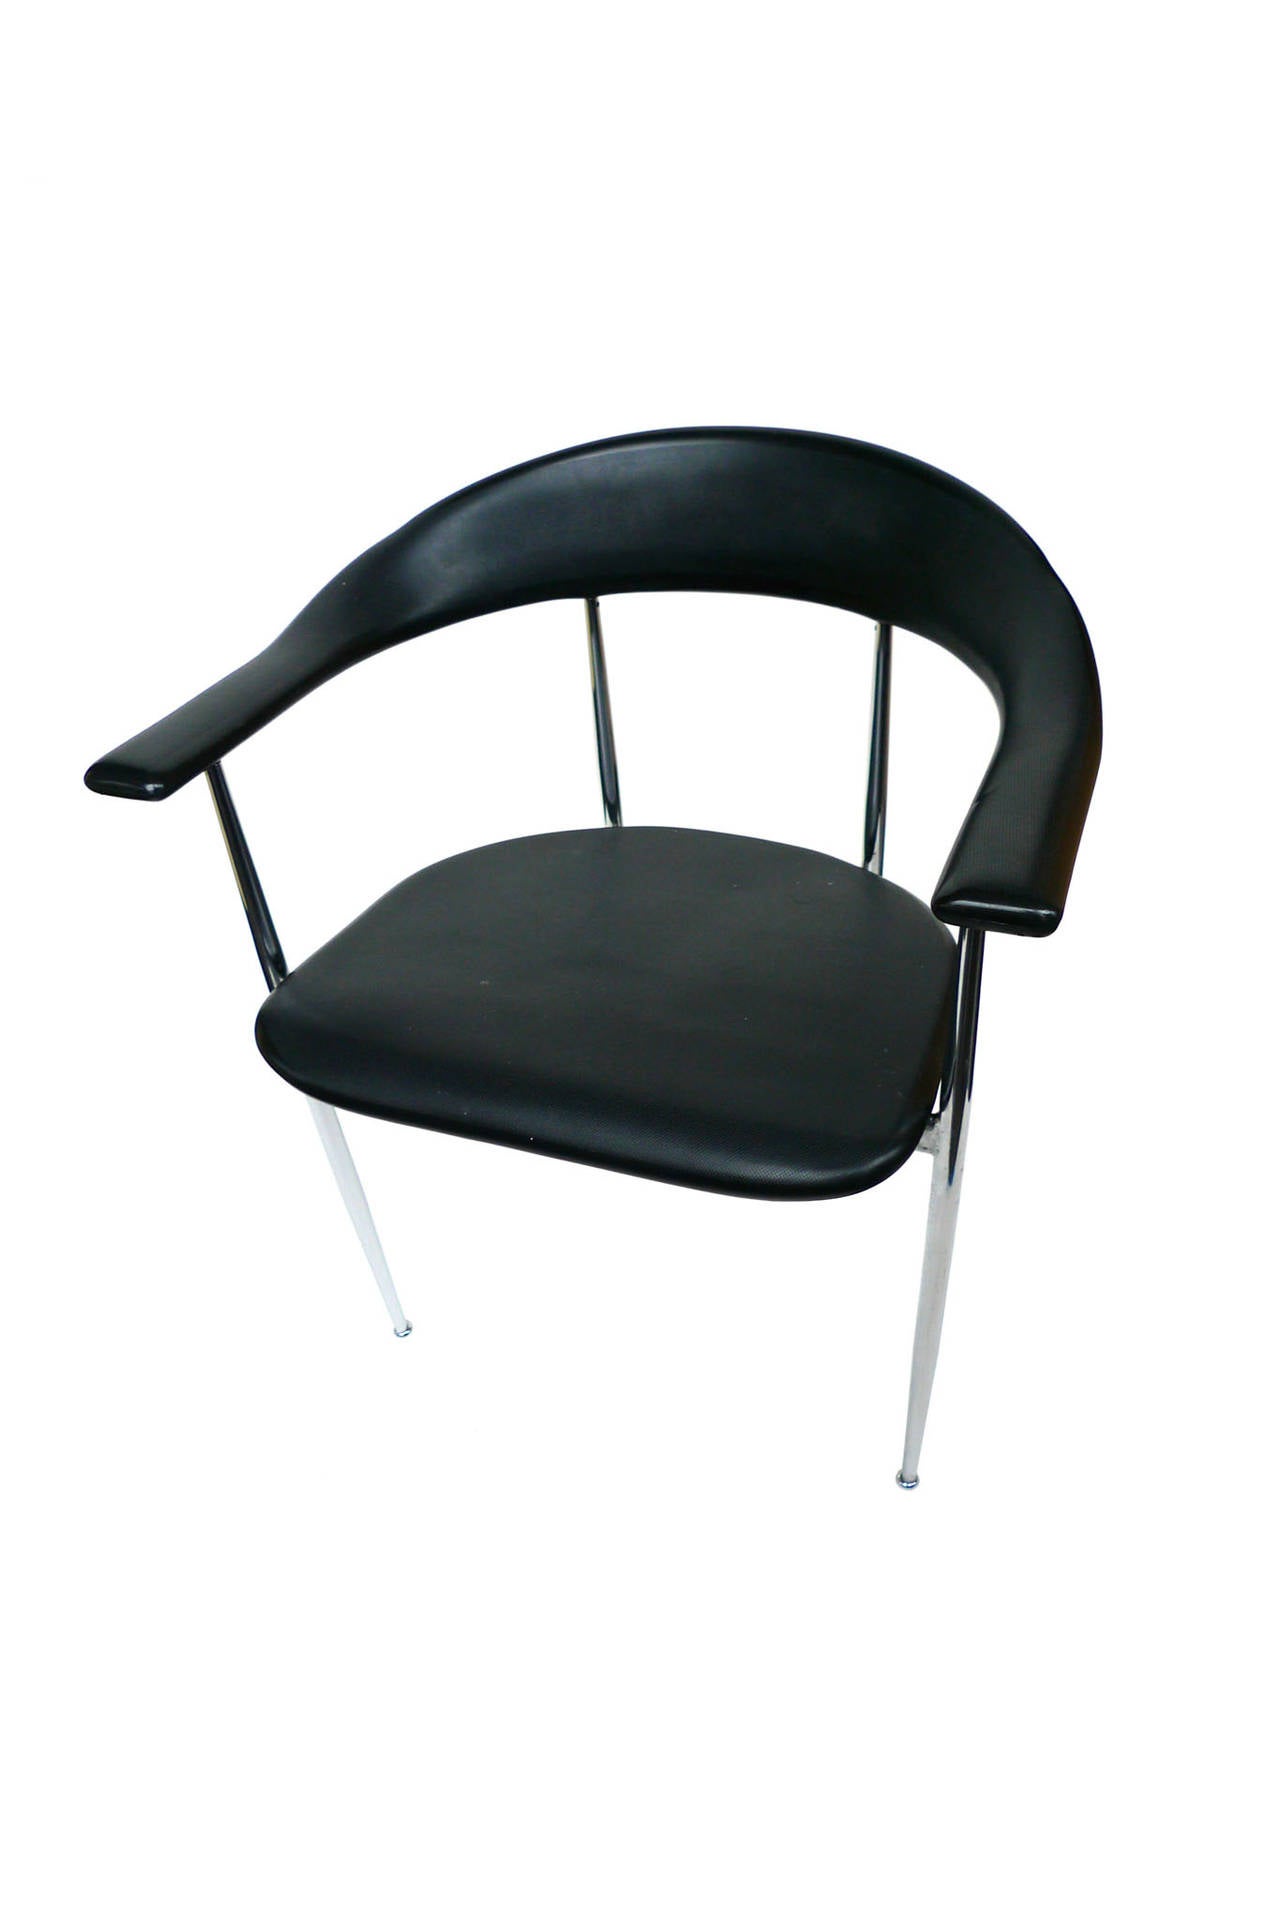 These minimalist Fasem dining chairs are comfortable and sturdy. The back and seat are molded black rubber, while the base and legs are chrome. Their design is noteworthy for the rounded edges, which accentuate the chairs' soft rubber material, and